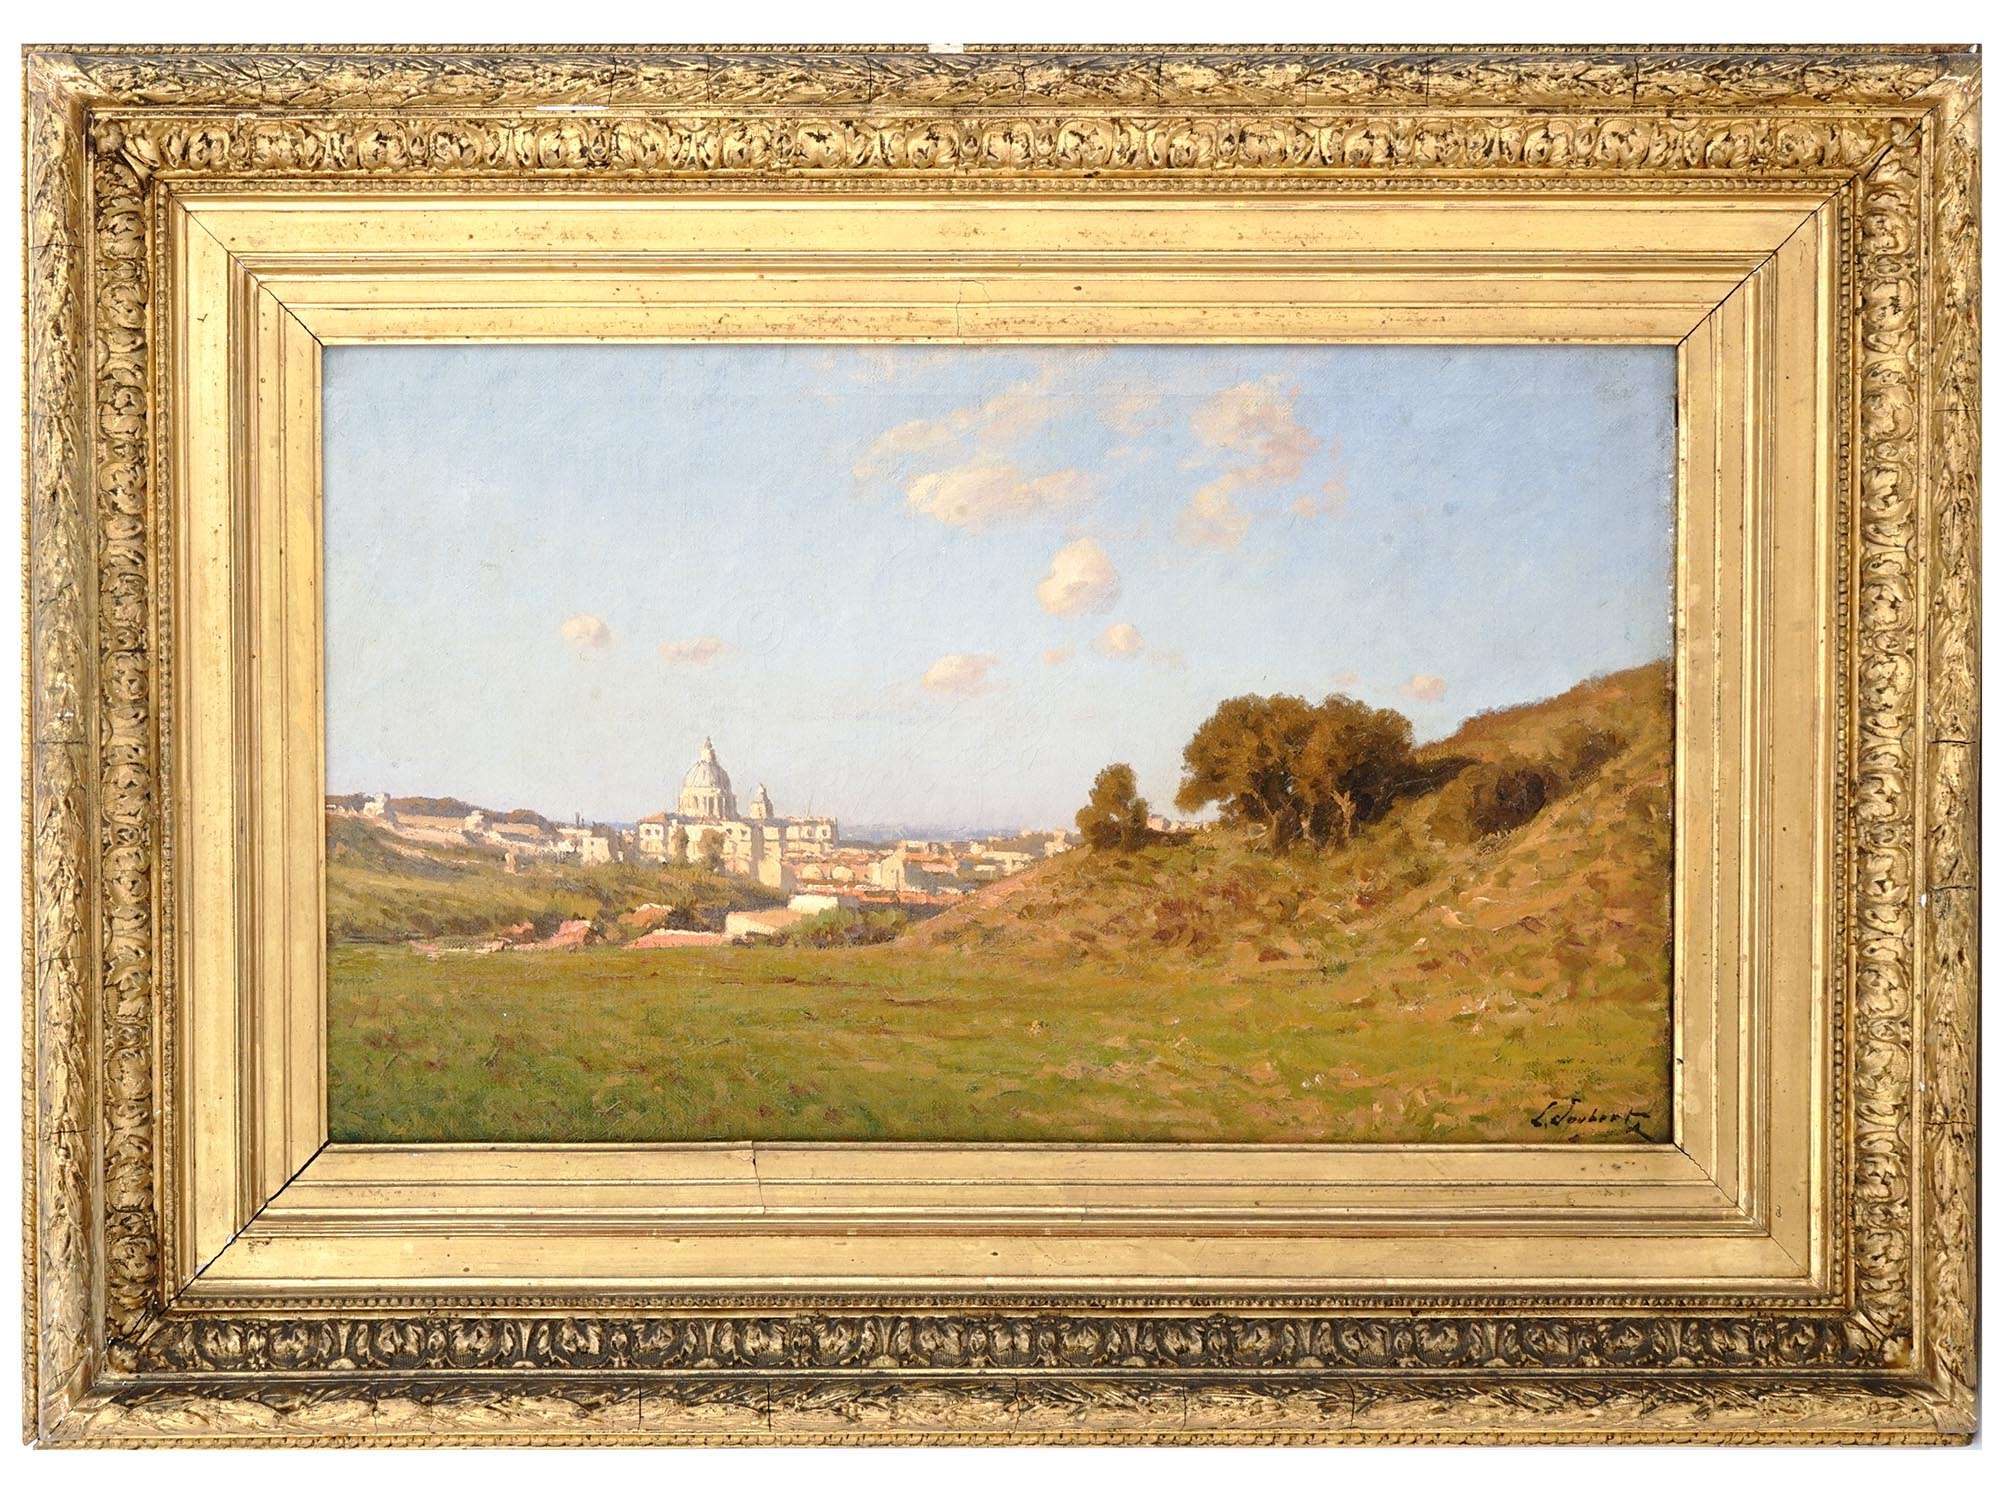 ANTIQUE VIEW OF ROME OIL PAINTING BY LEON JOUBERT PIC-0